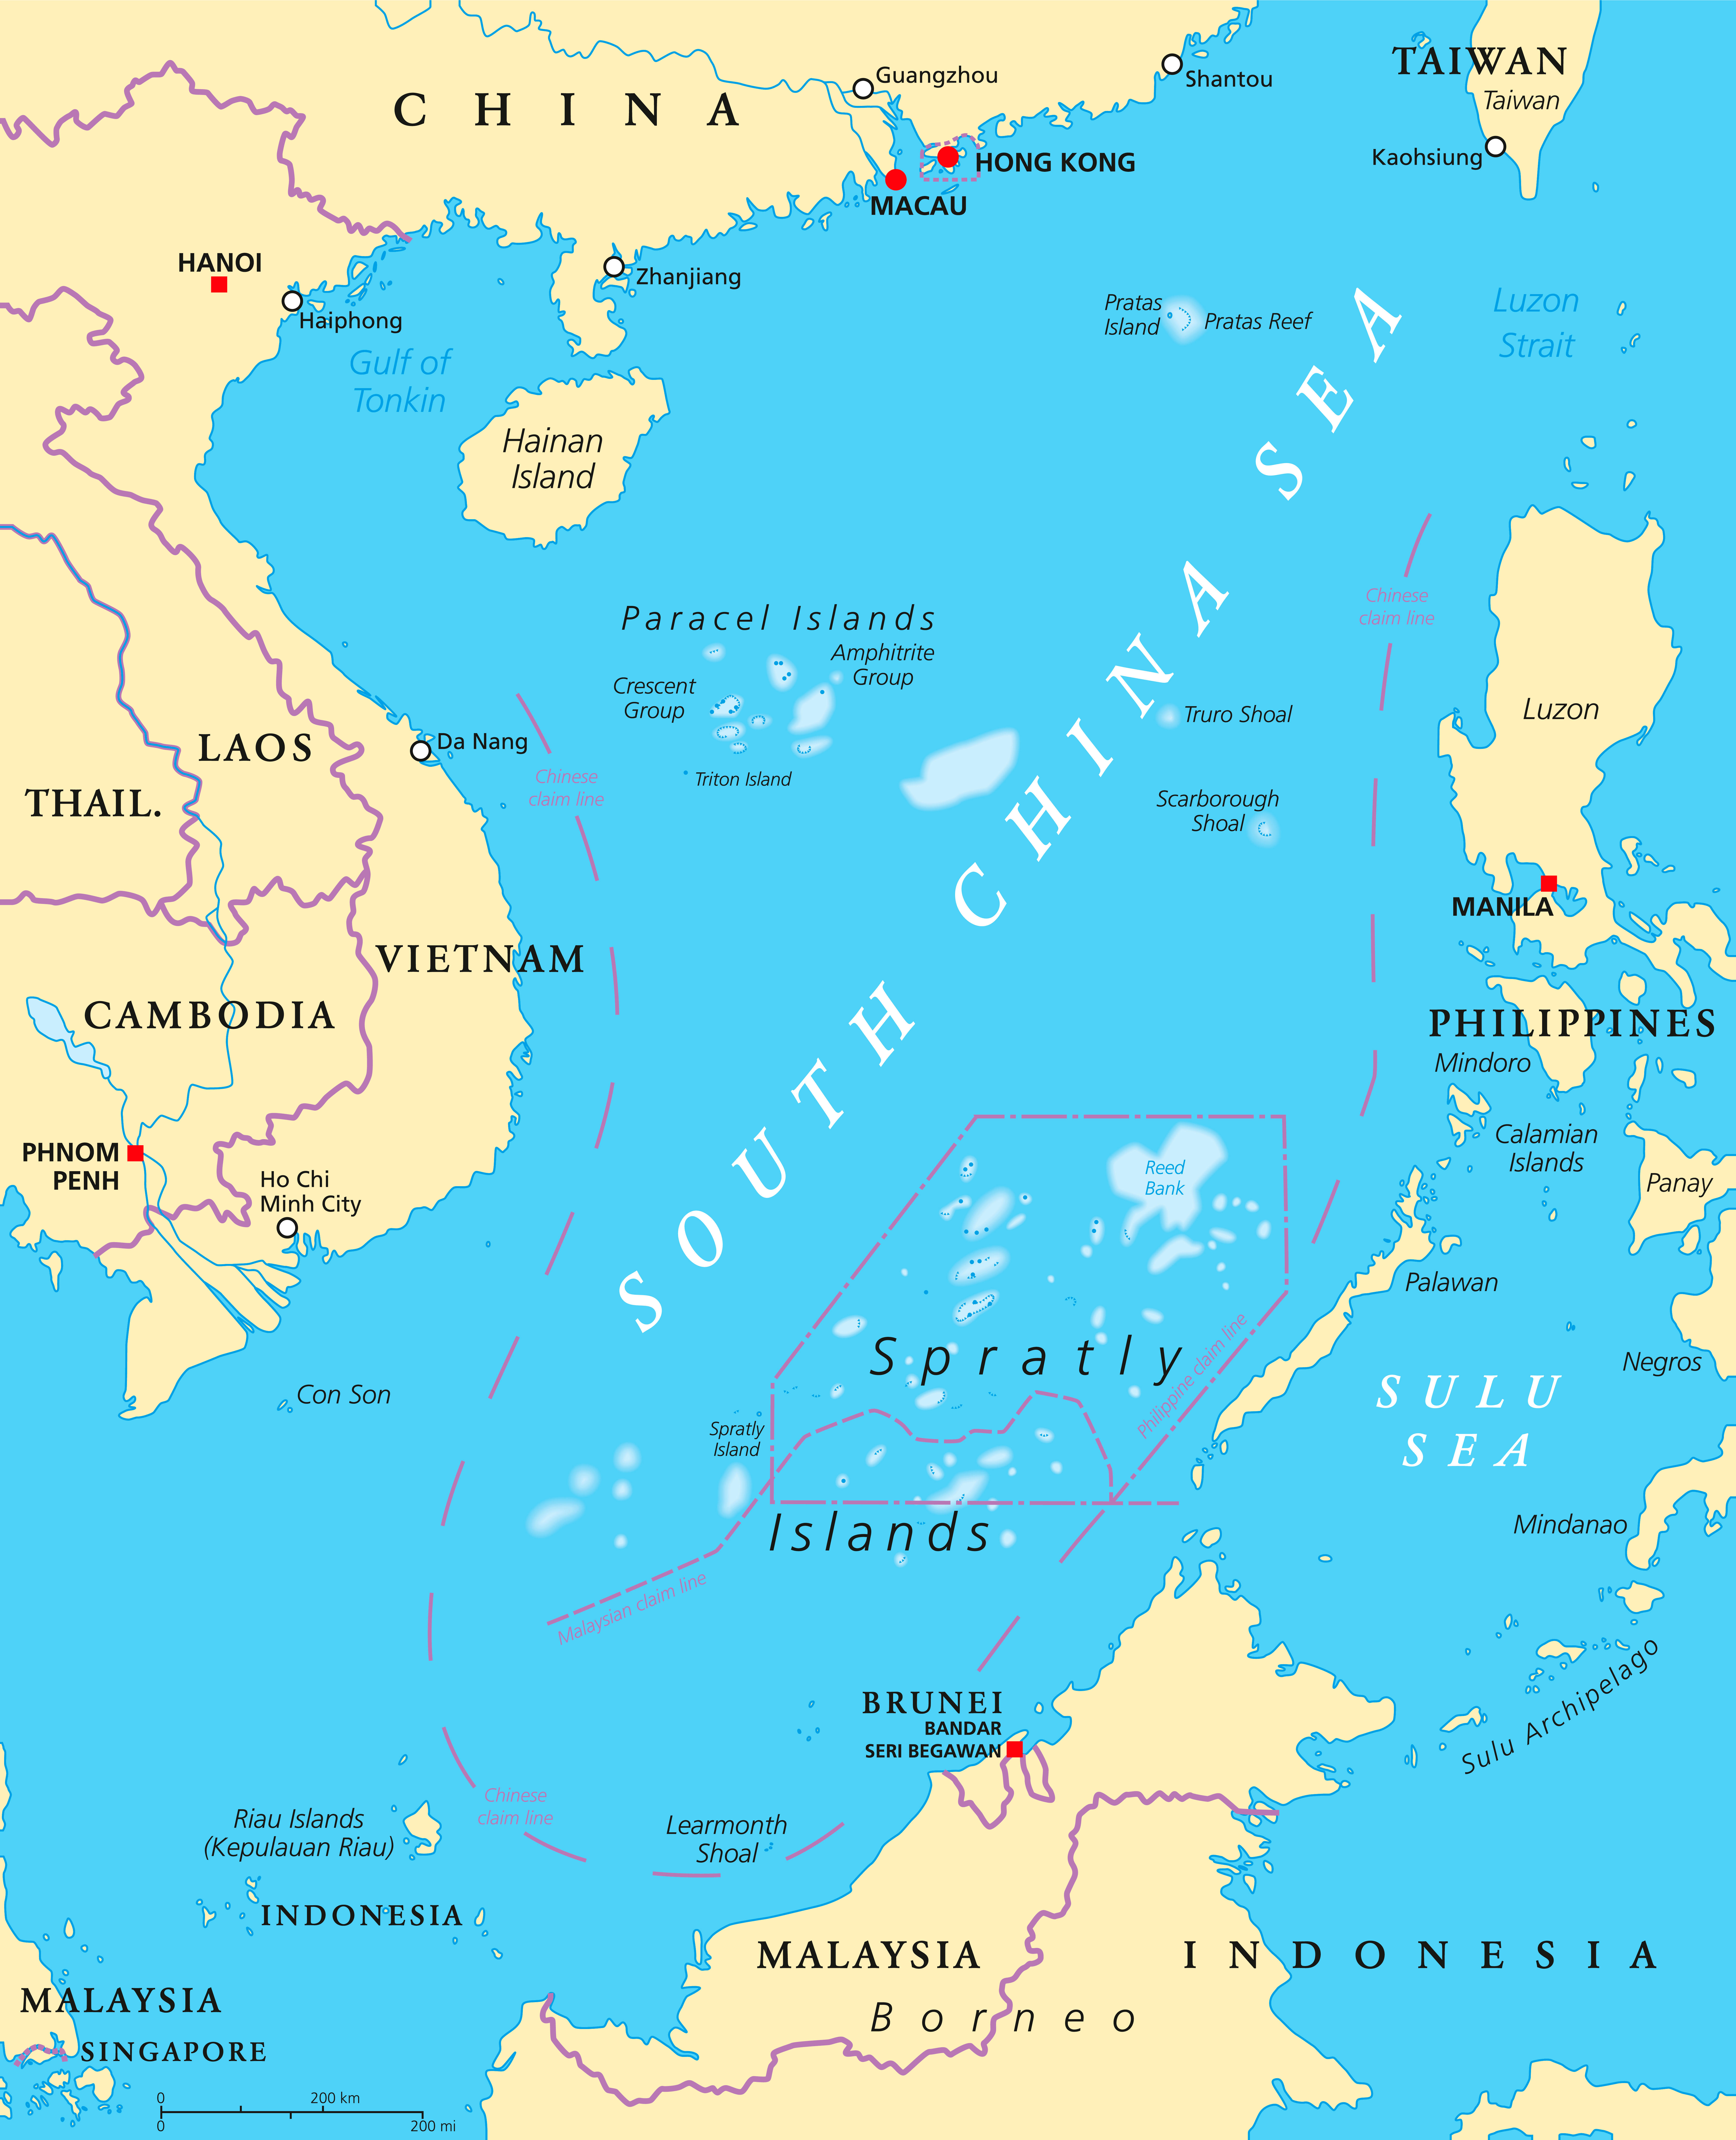 A map of the South China Sea islands